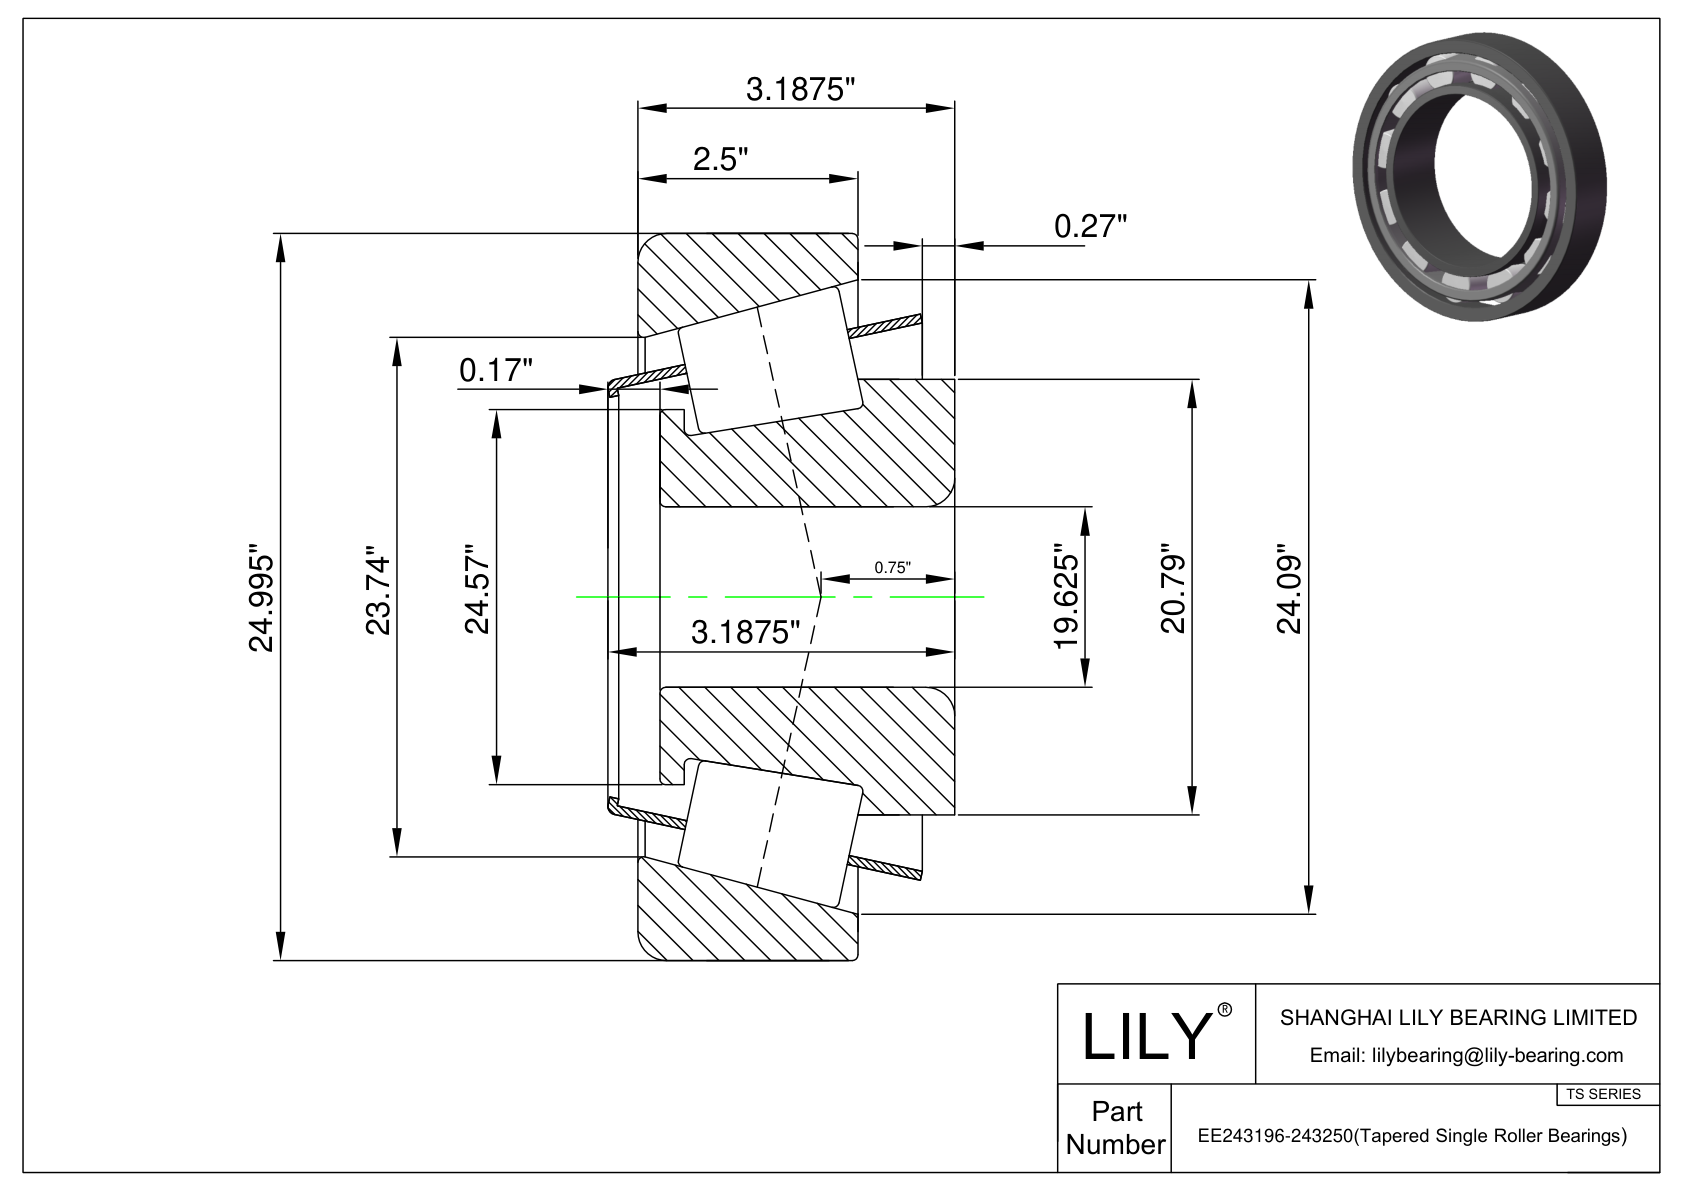 EE243196-243250 TS (Tapered Single Roller Bearings) (Imperial) cad drawing